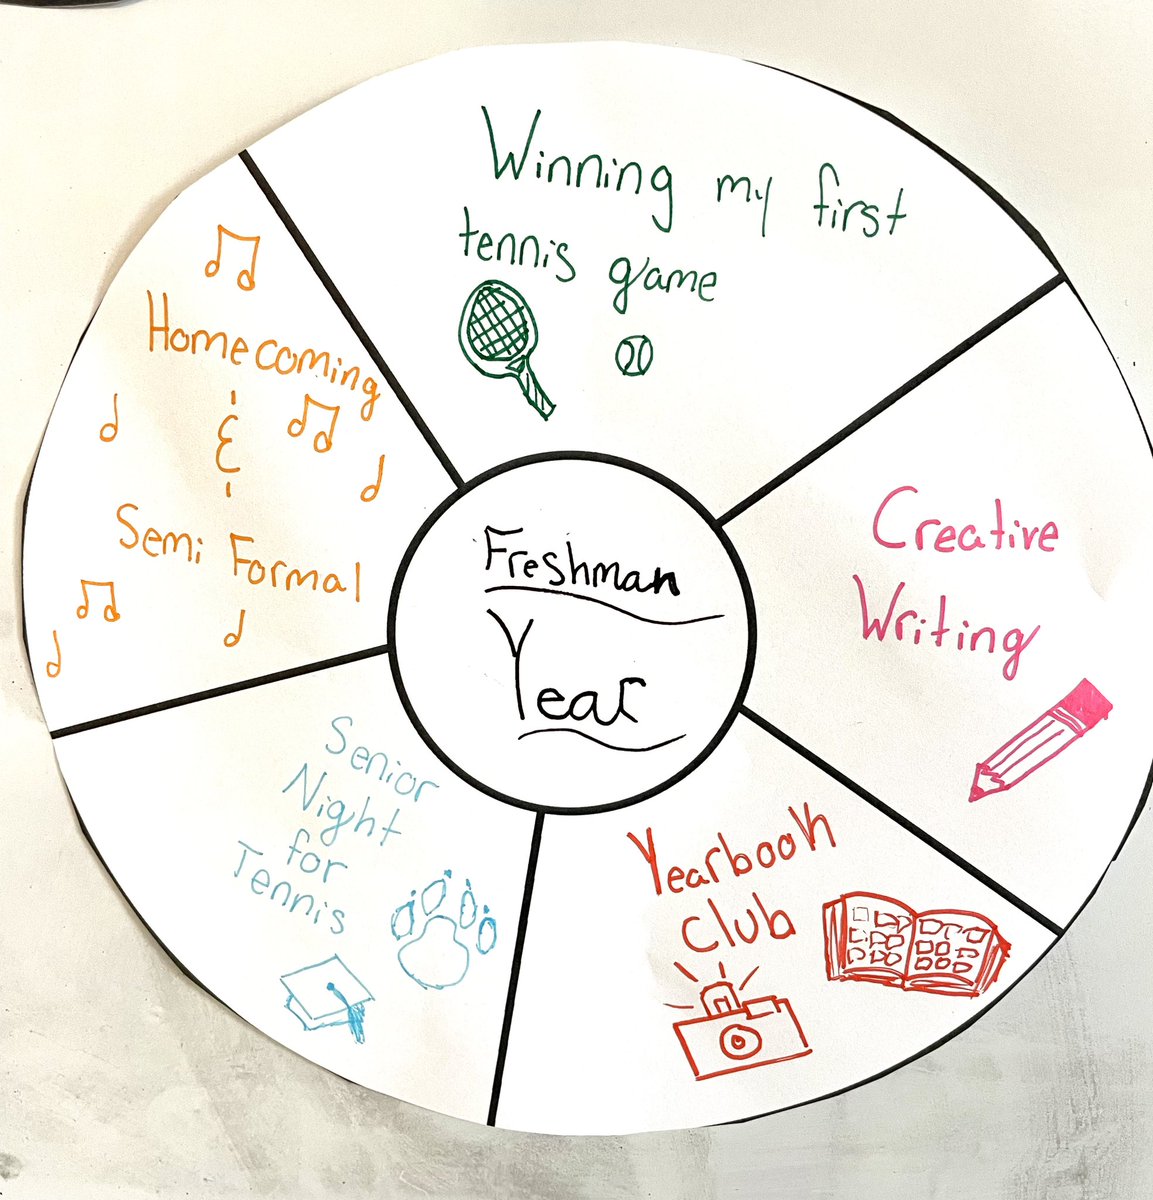 Today my classes made memory wheels to reflect on our favorite people and activities from this school year 🛞😊 #WHPantherPride #OneDayMore #SEL